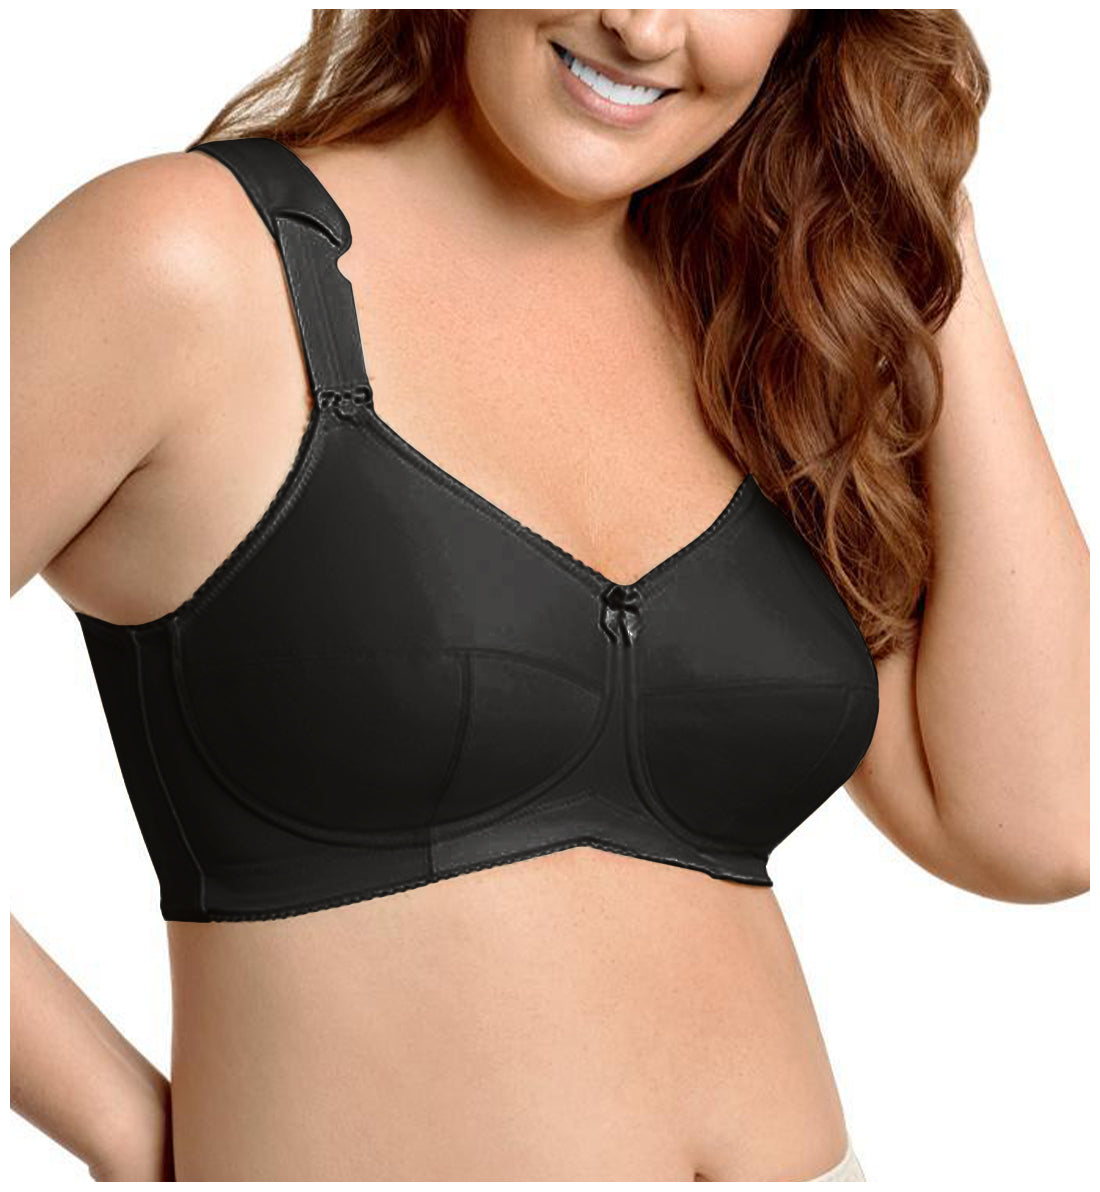 Elila Kaylee 3-Part Cup Full Support Softcup Bra (1505)- Black - Breakout  Bras